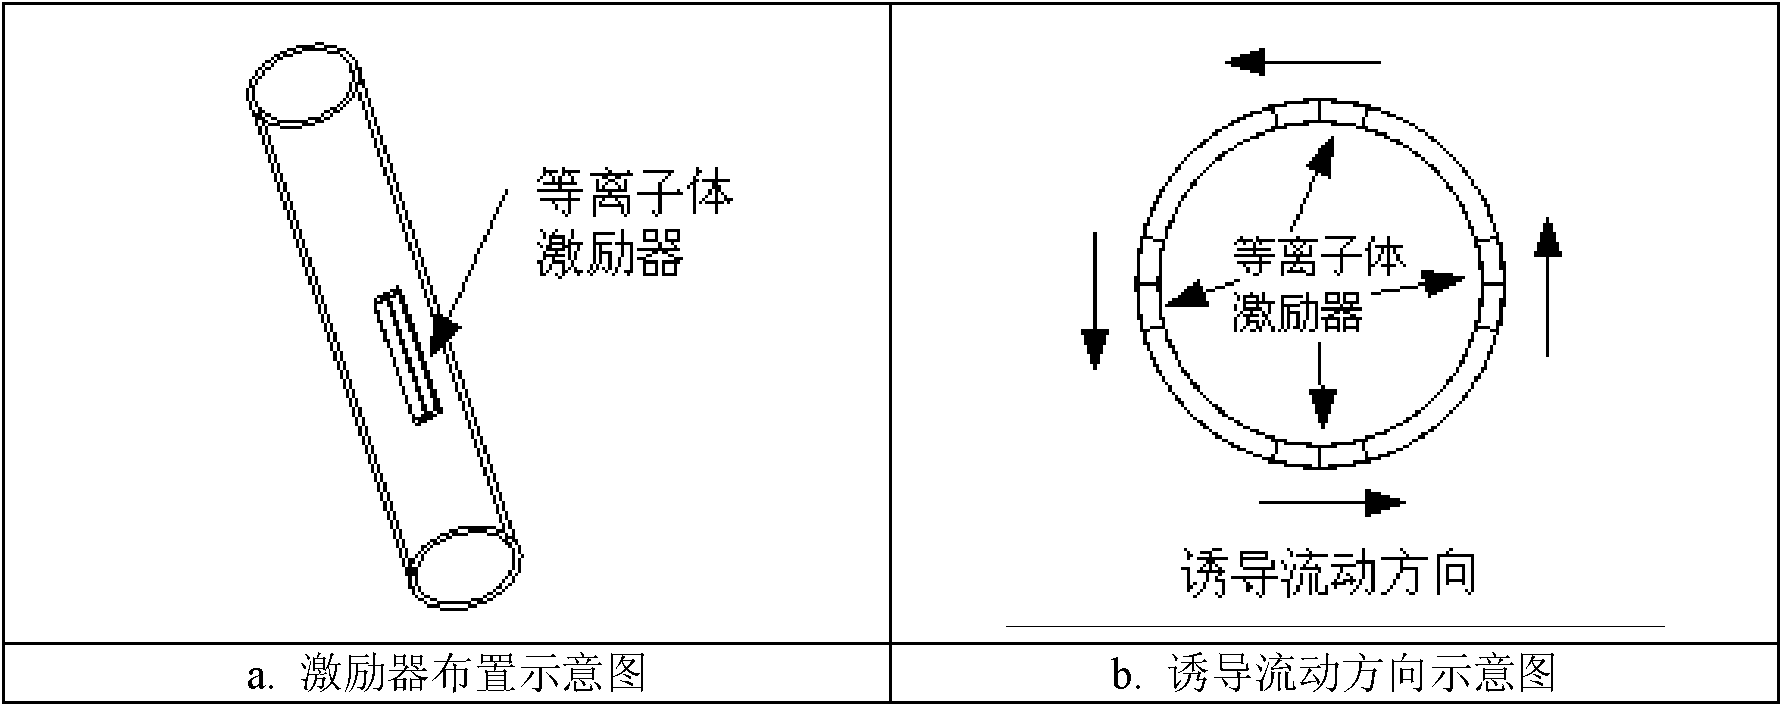 Dielectric barrier discharge plasma axial rotational flow device